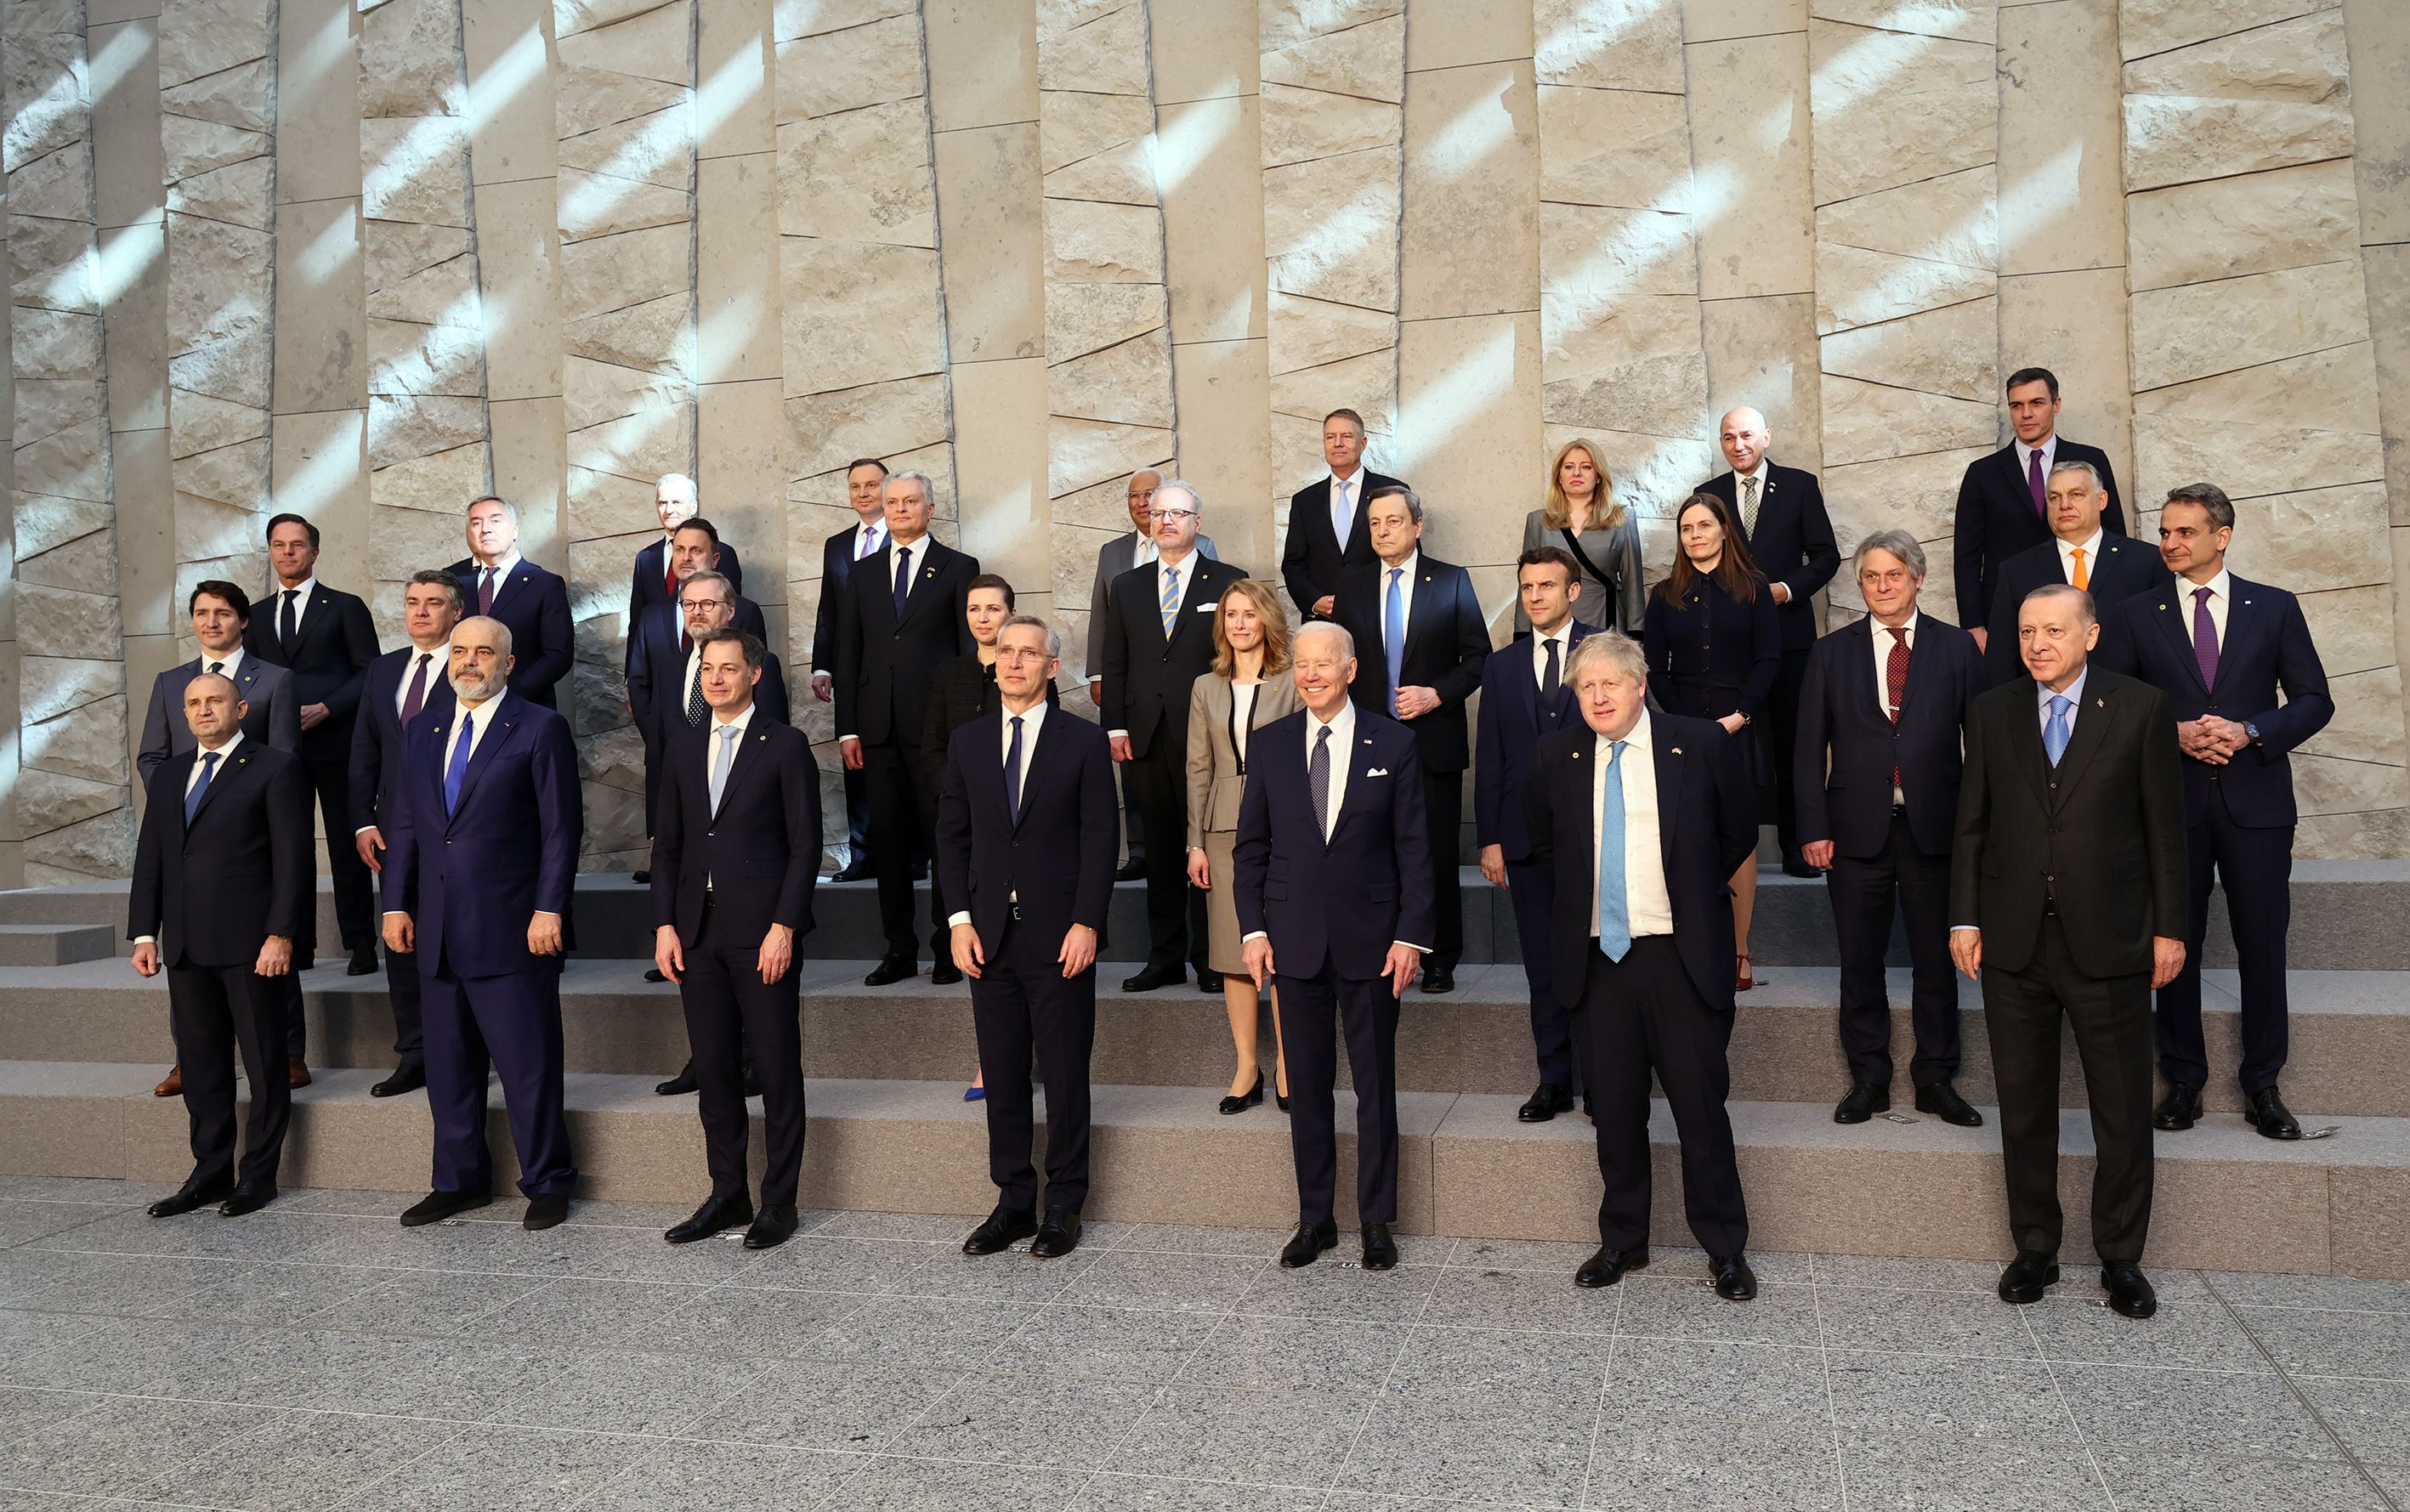 NATO leaders pose for family photo